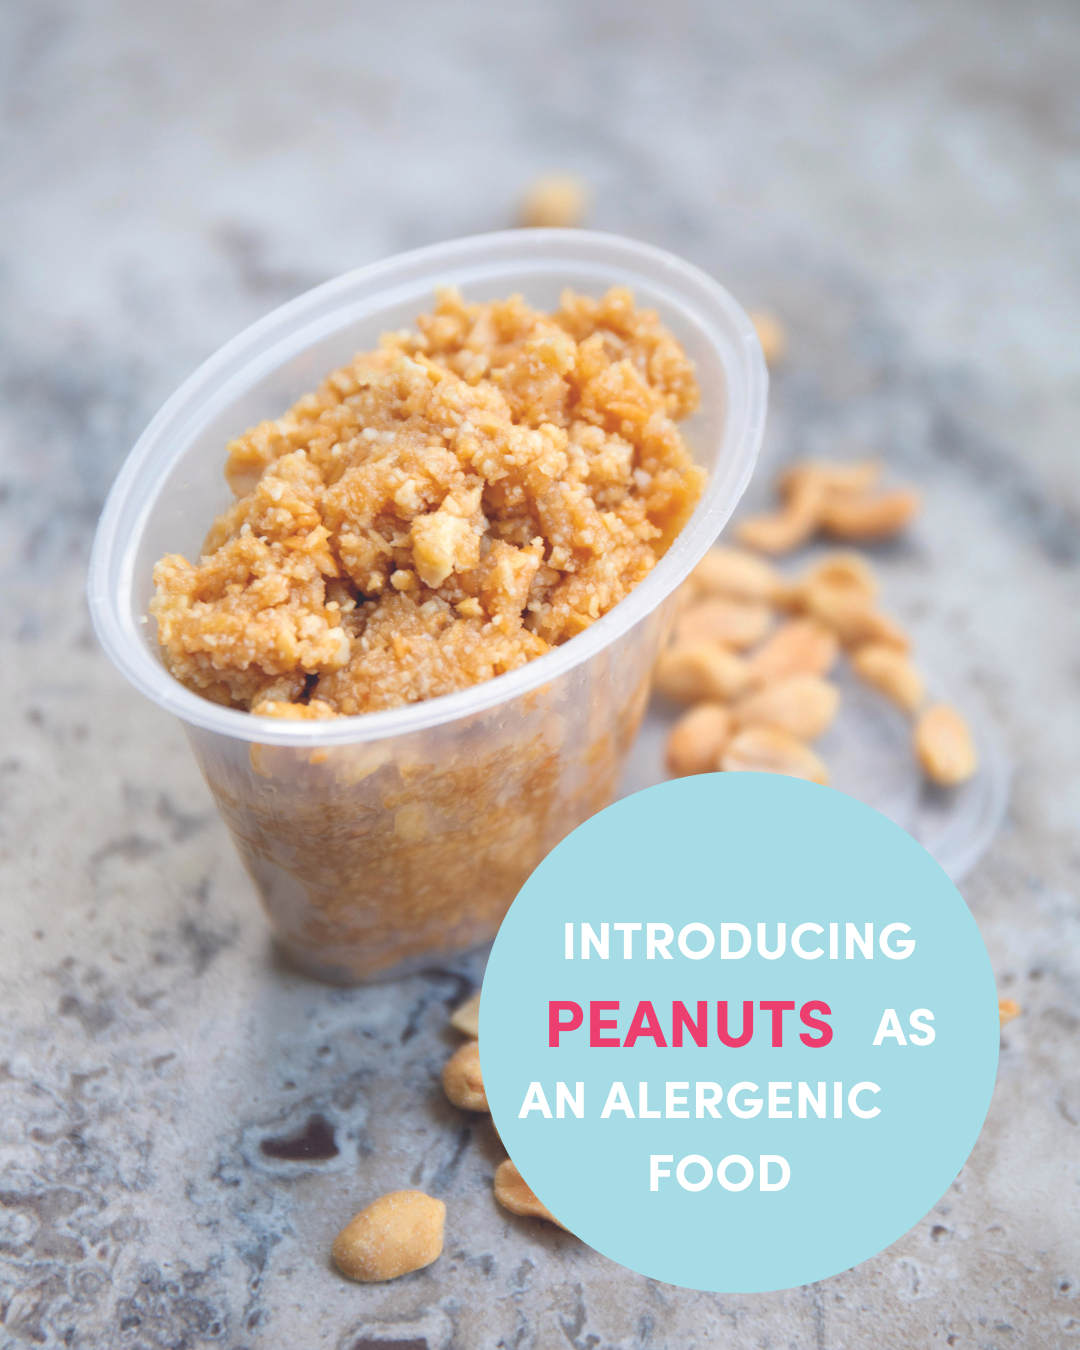 How best to introduce peanuts? No history of allergy